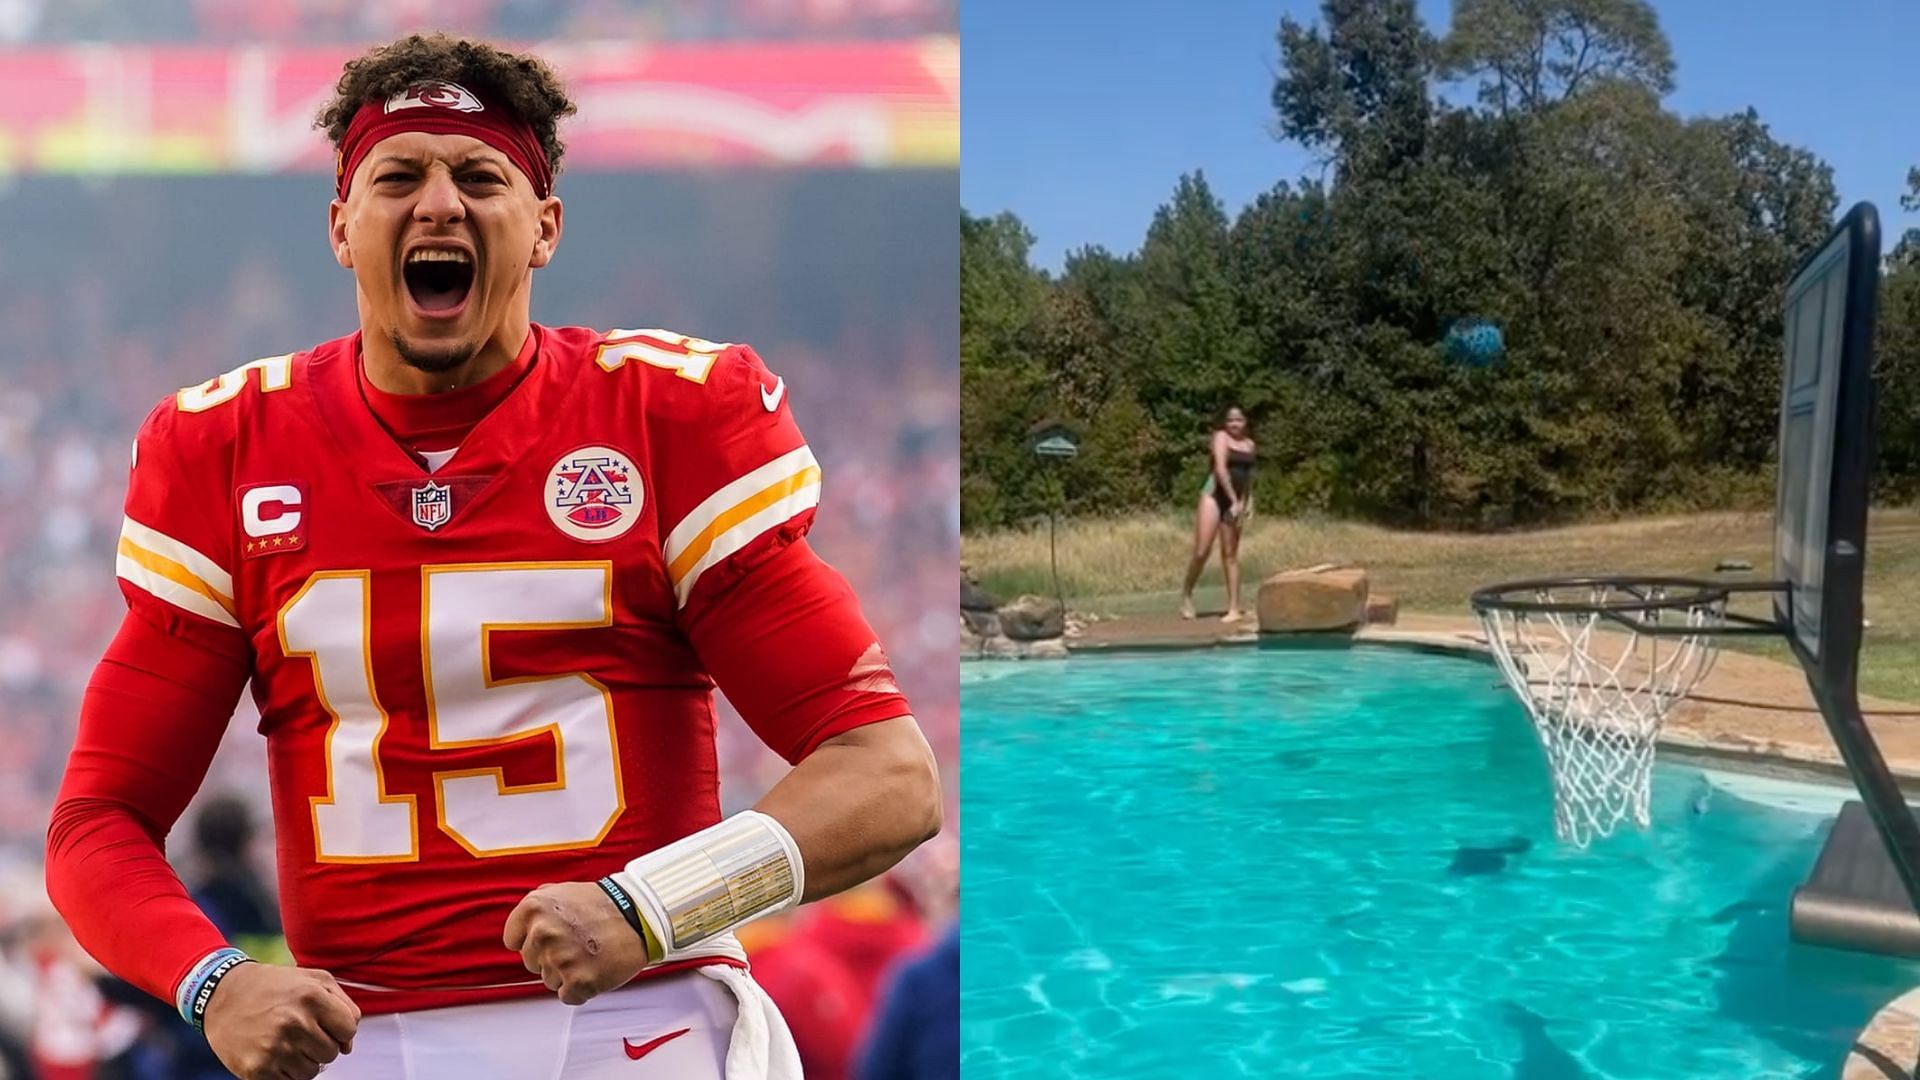 Fans comment on Patrick Mahomes